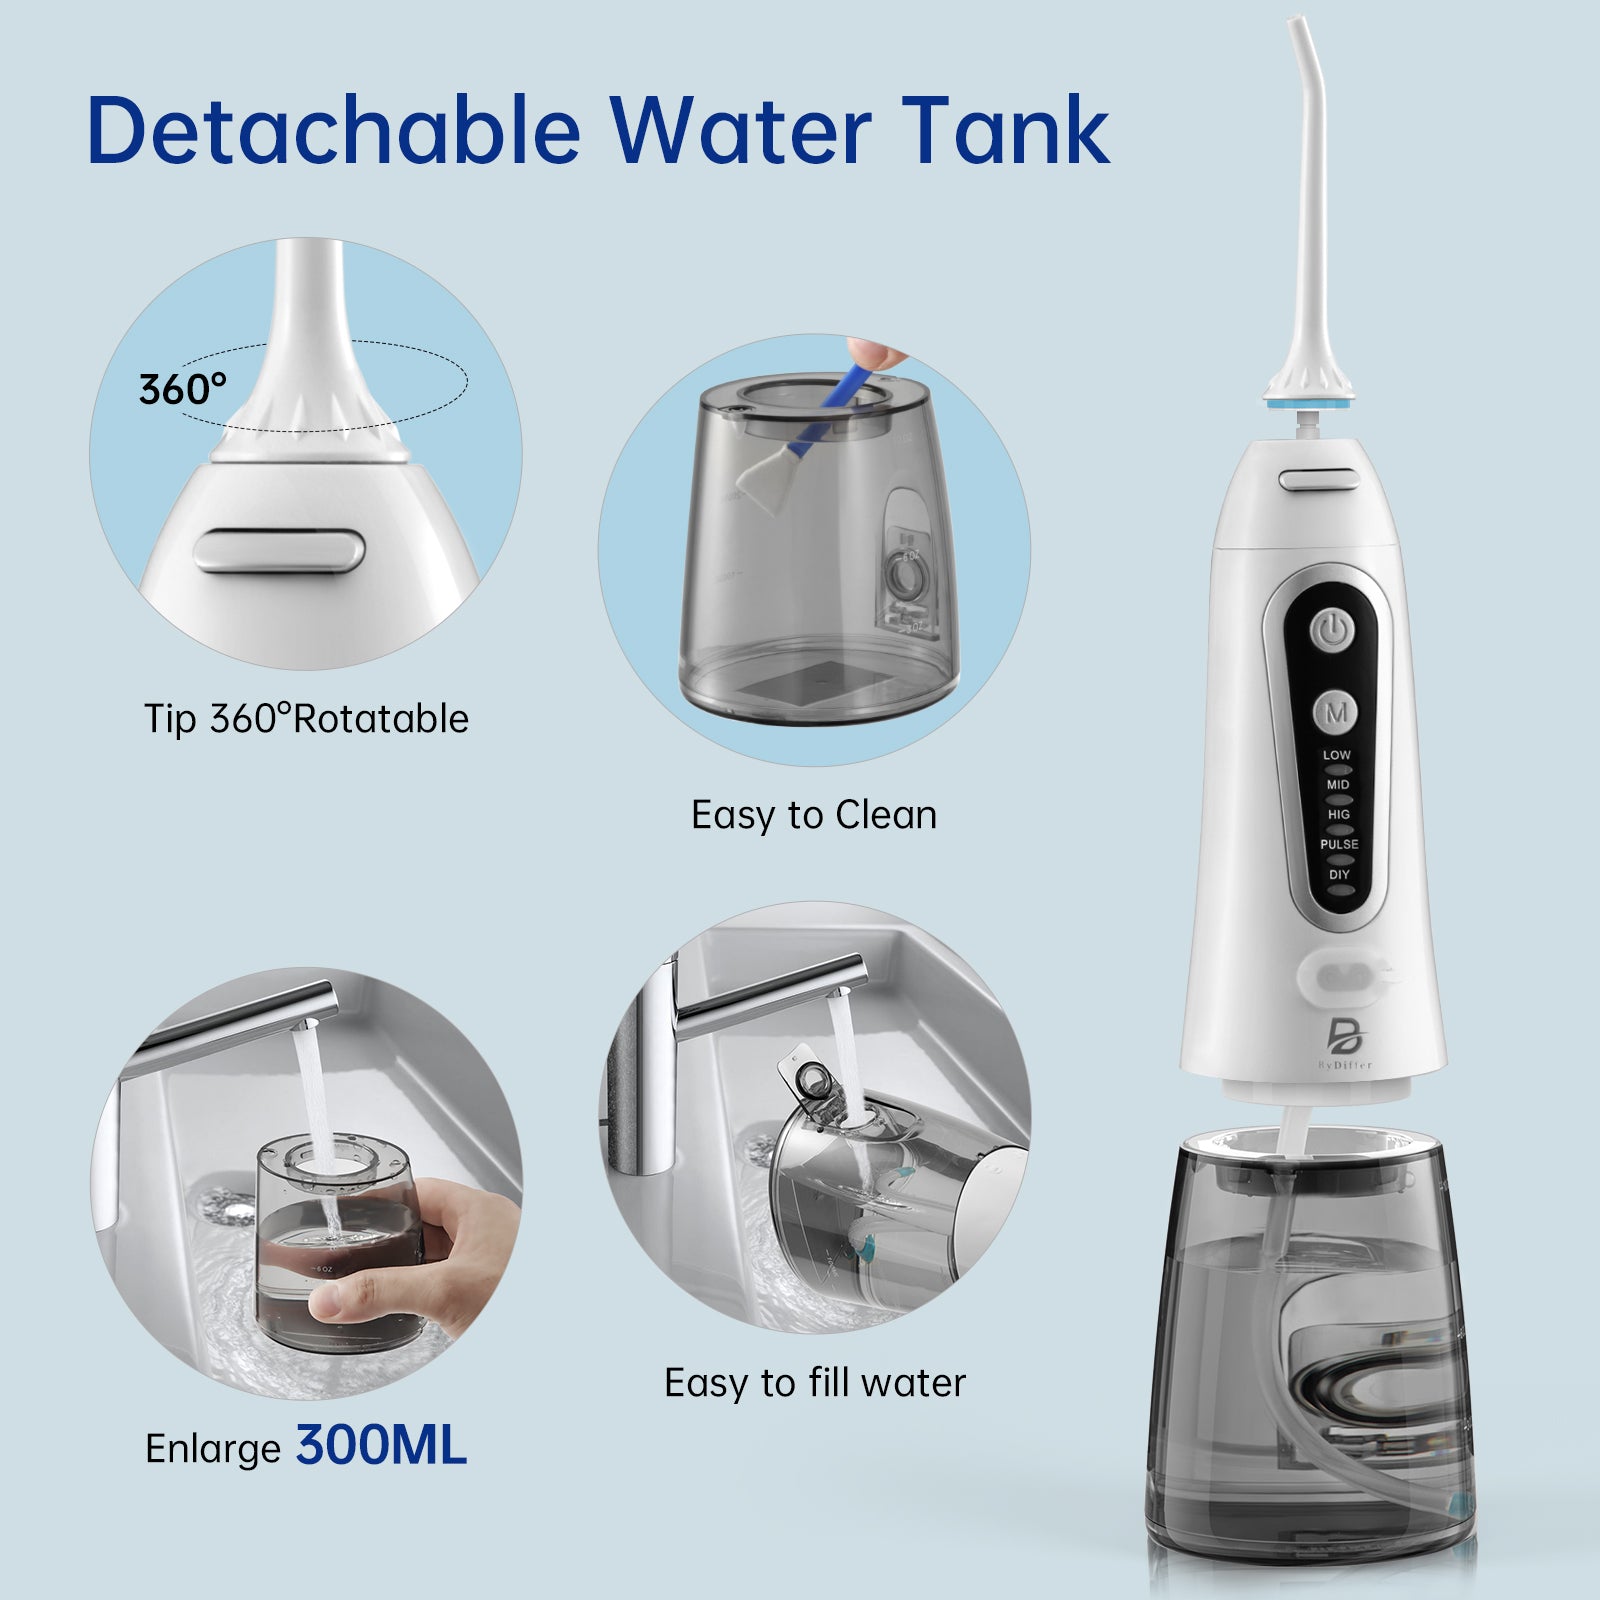 Portable Water Flosser for Teeth Cleaning, 4 Modes 4 Jets Mini